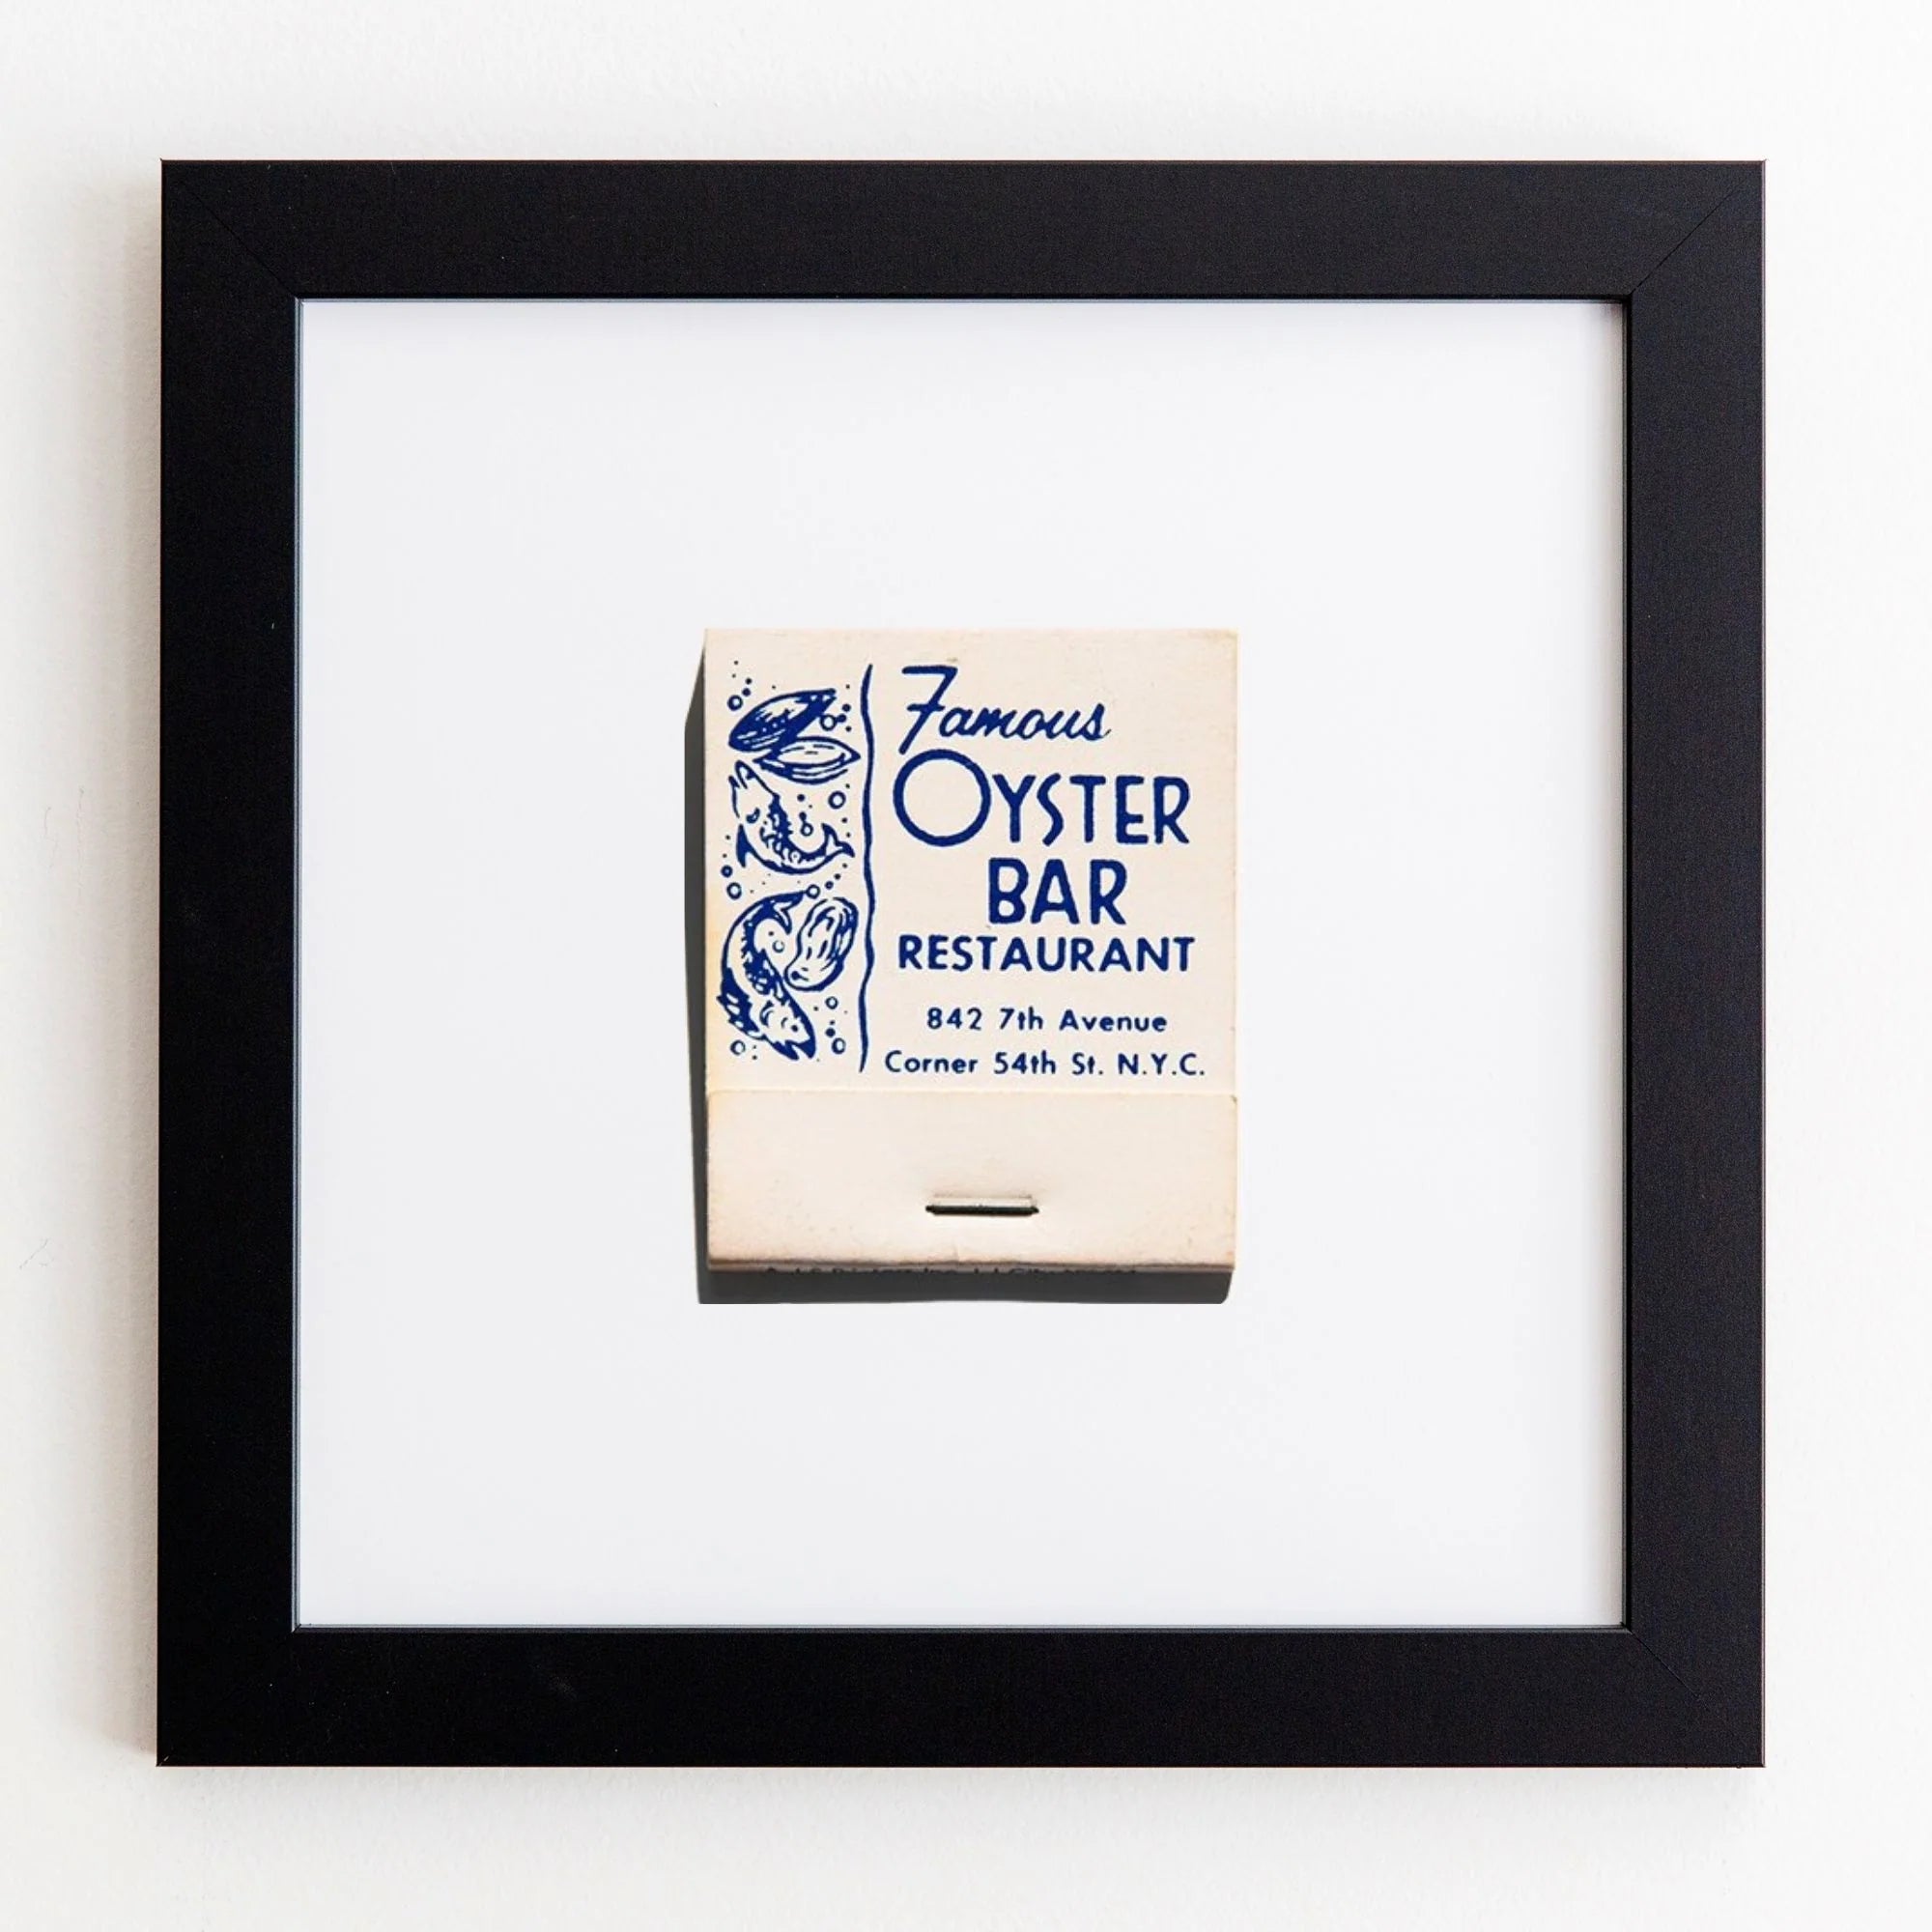 A framed matchbook cover from Match South&#39;s &quot;Famous Oyster Bar Restaurant&quot; displaying its address and decorative marine life illustrations on a white Bungalow-style wall in an Art Square Black Frame.